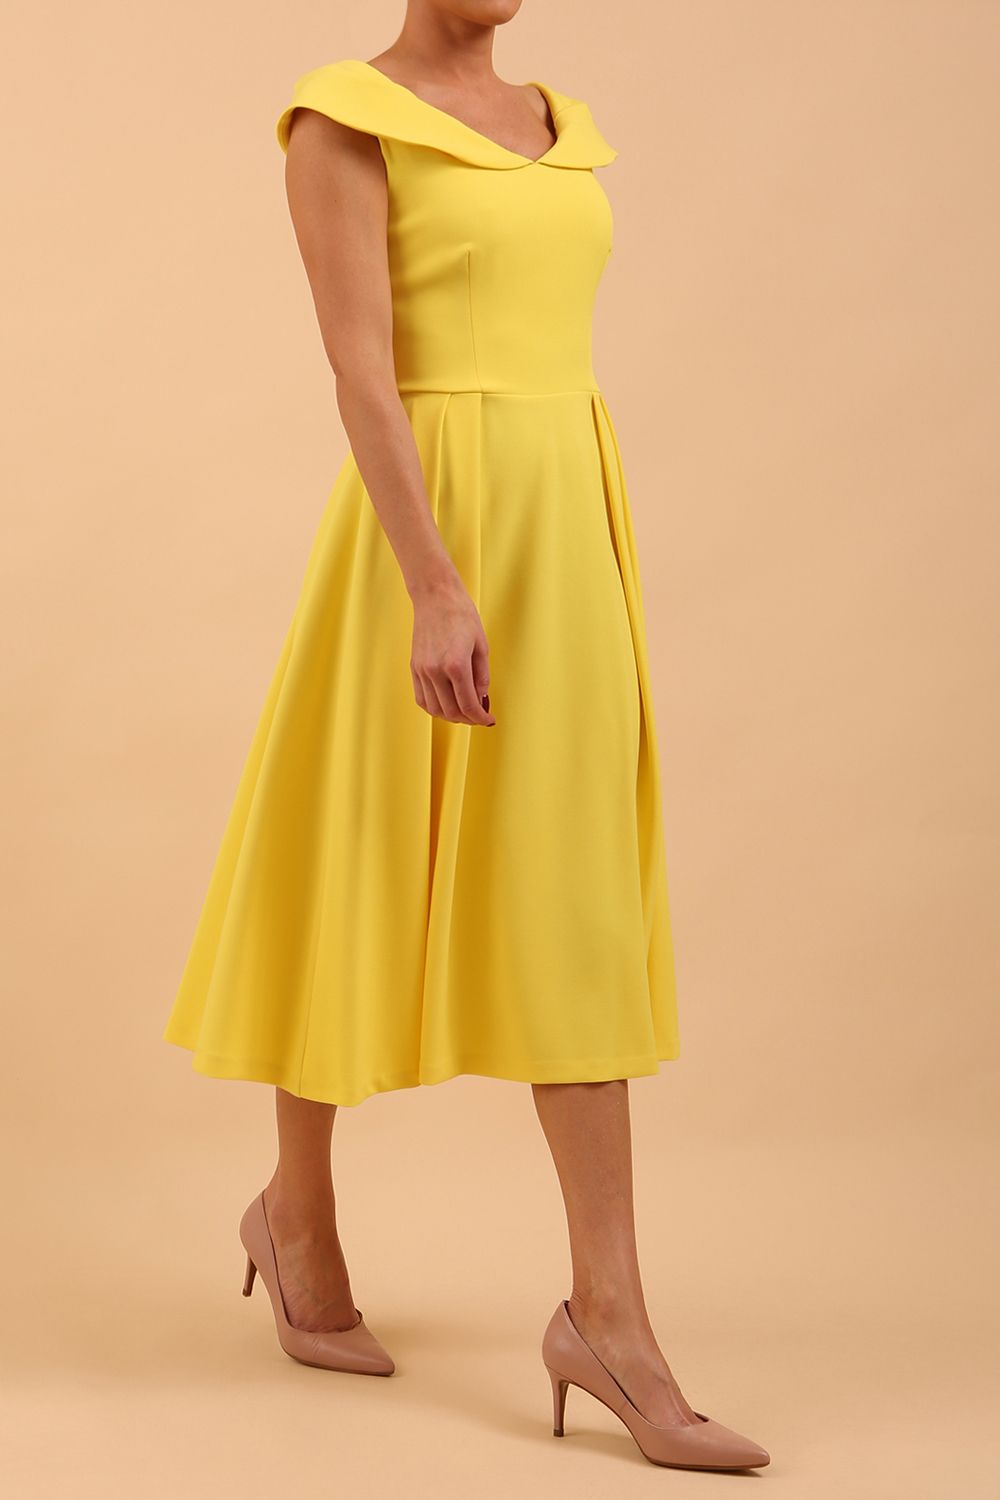 model is wearing divacatwalk Chesterton Sleeveless a-line swing dress in blazing yellow with oversized collar front